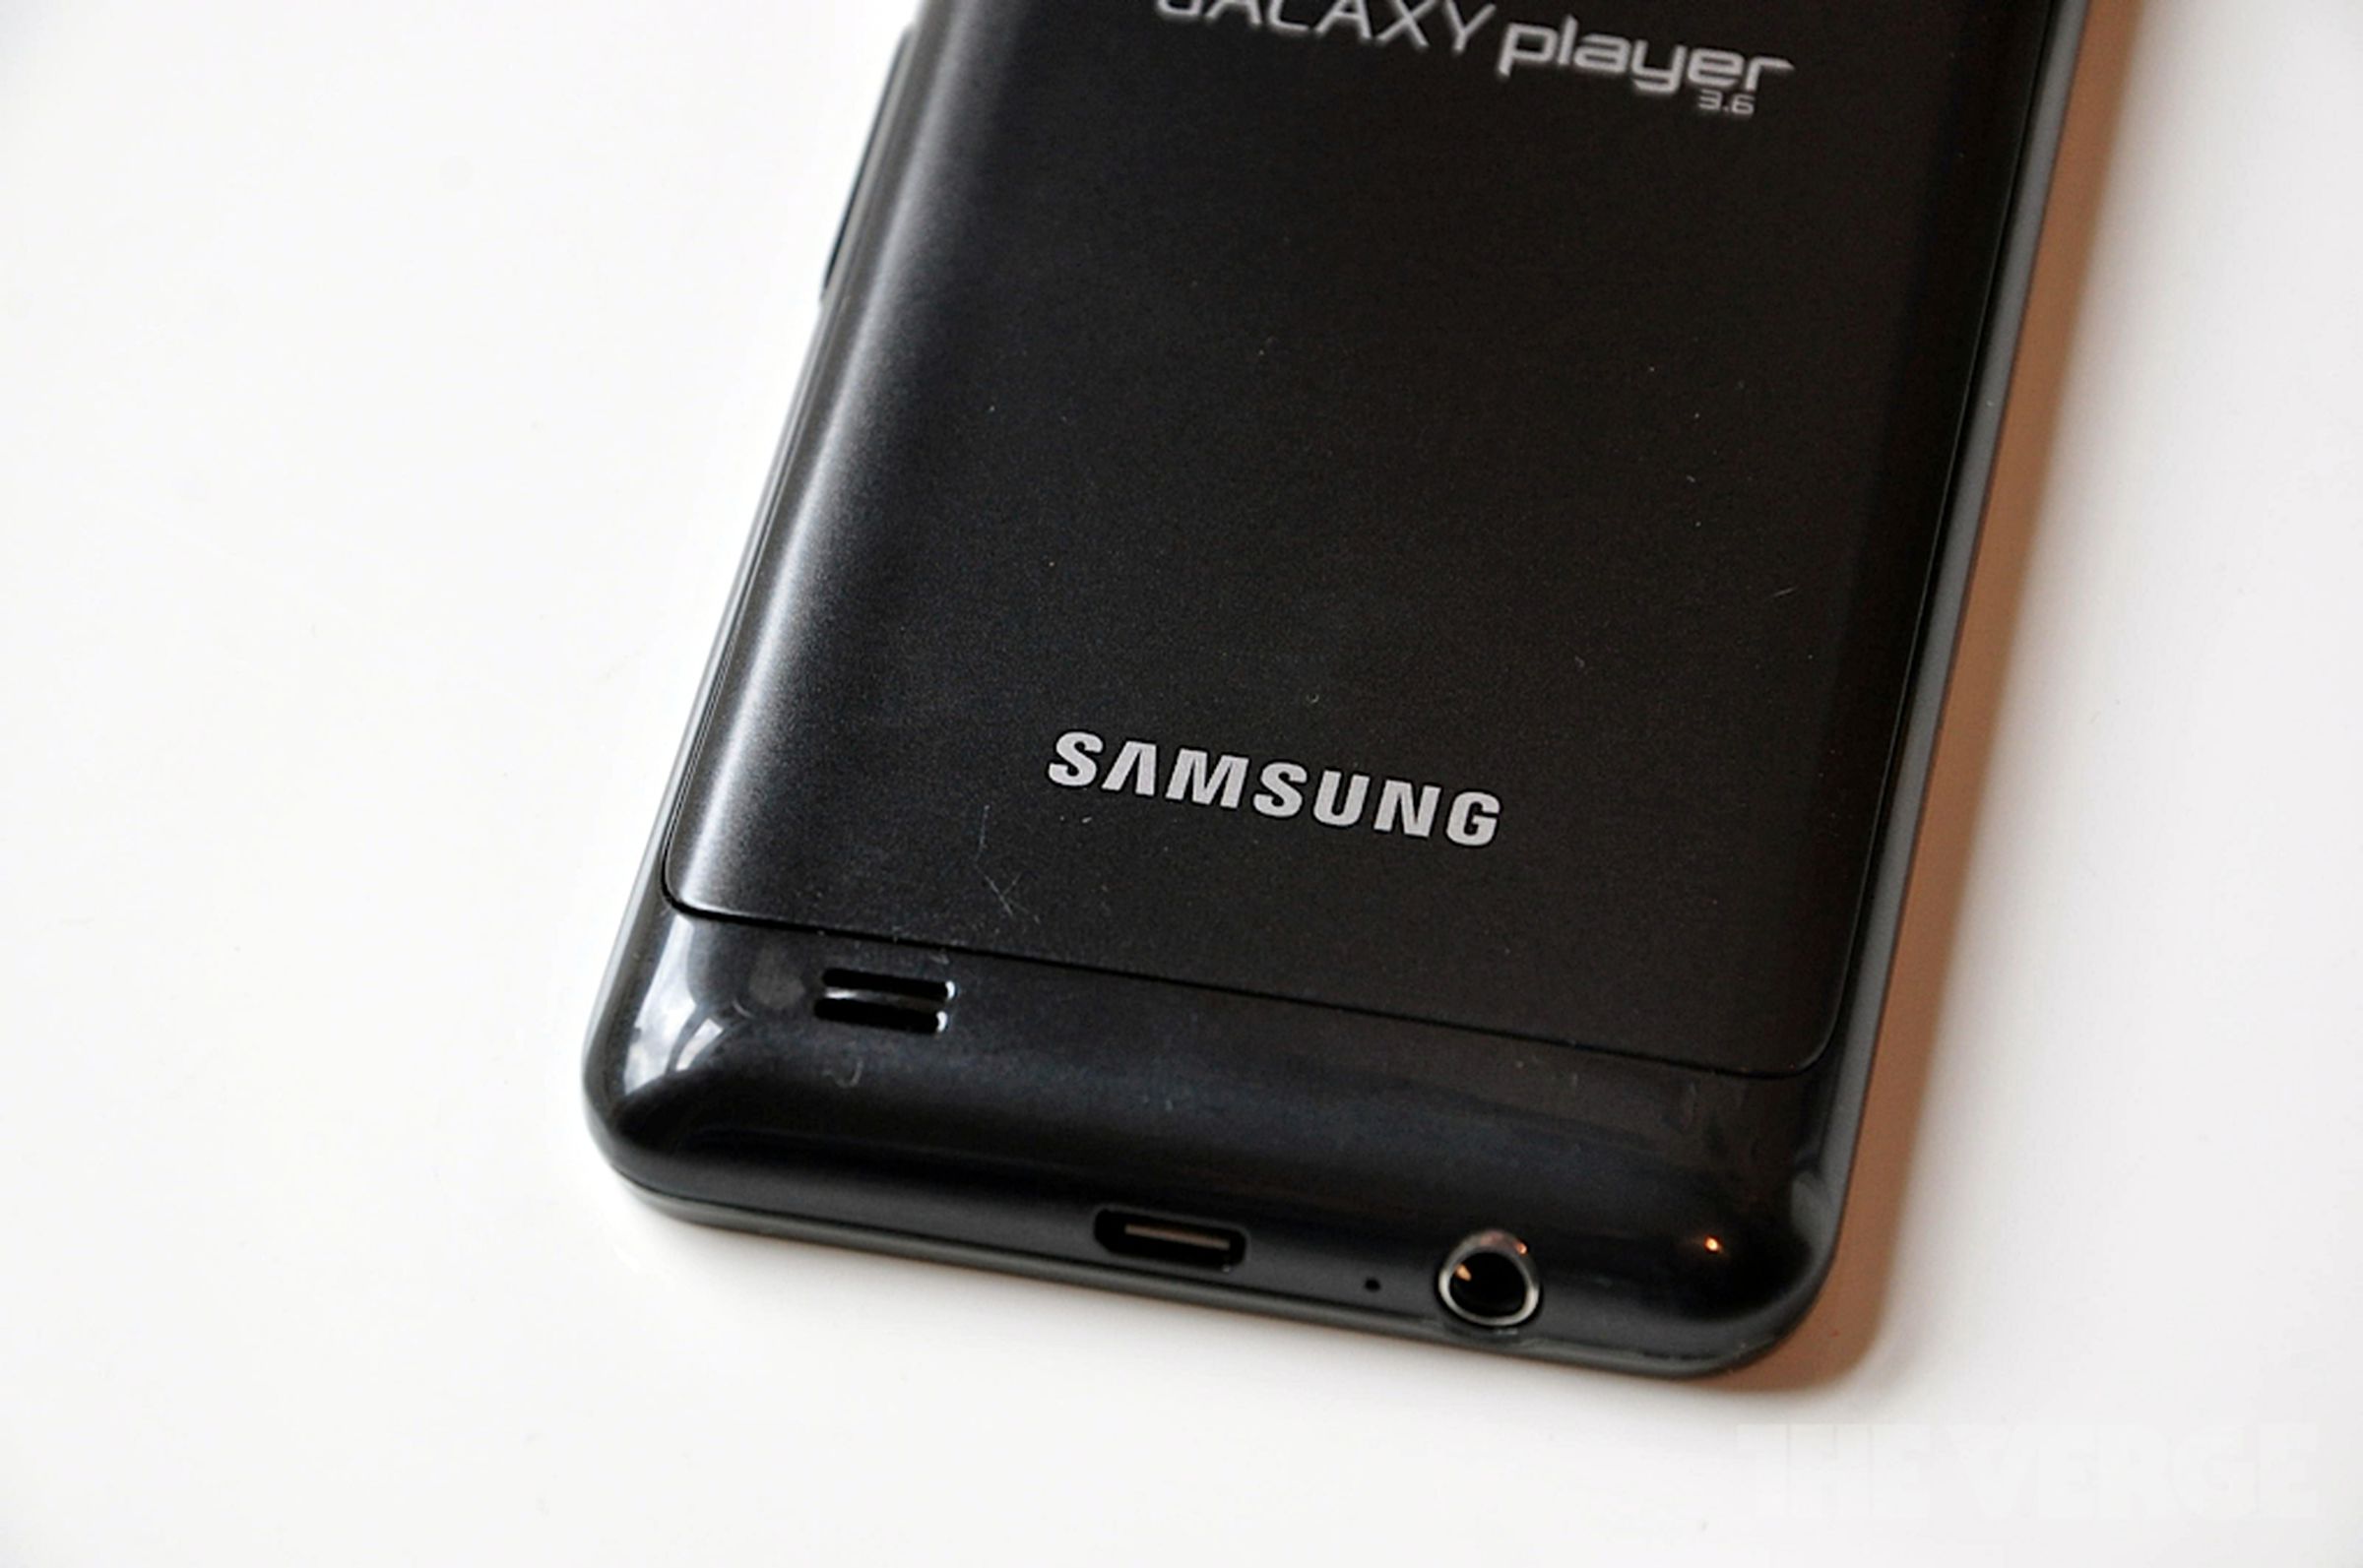 Samsung Galaxy Player 3.6 hands-on pictures